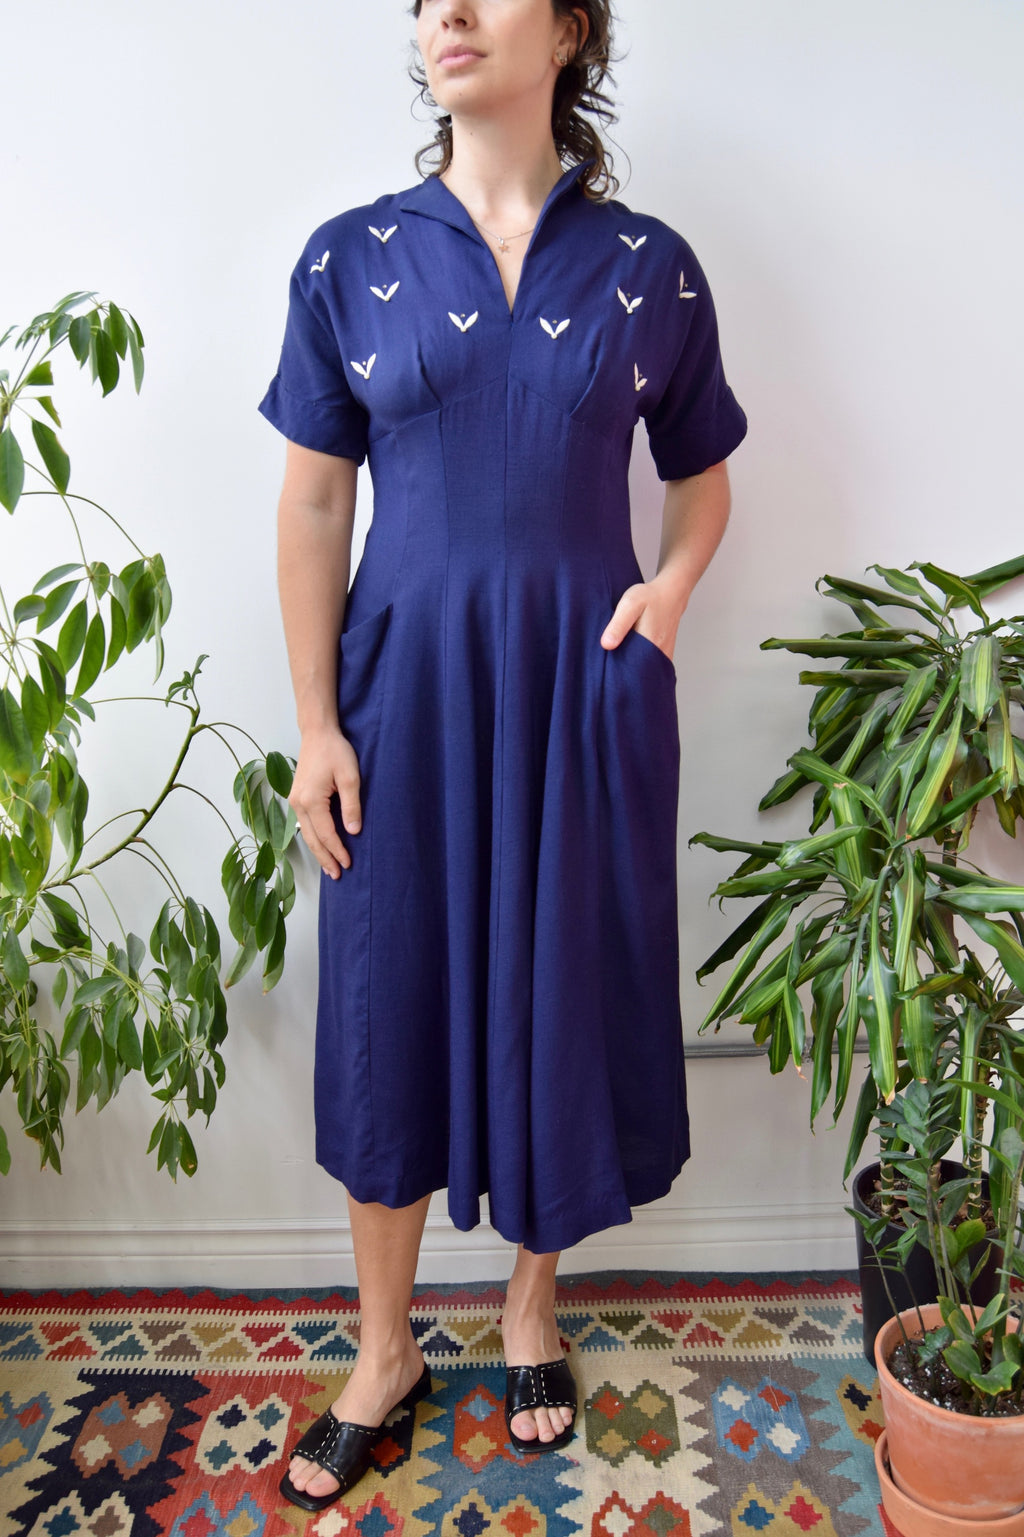 Helicopter Seed Fifties Dress